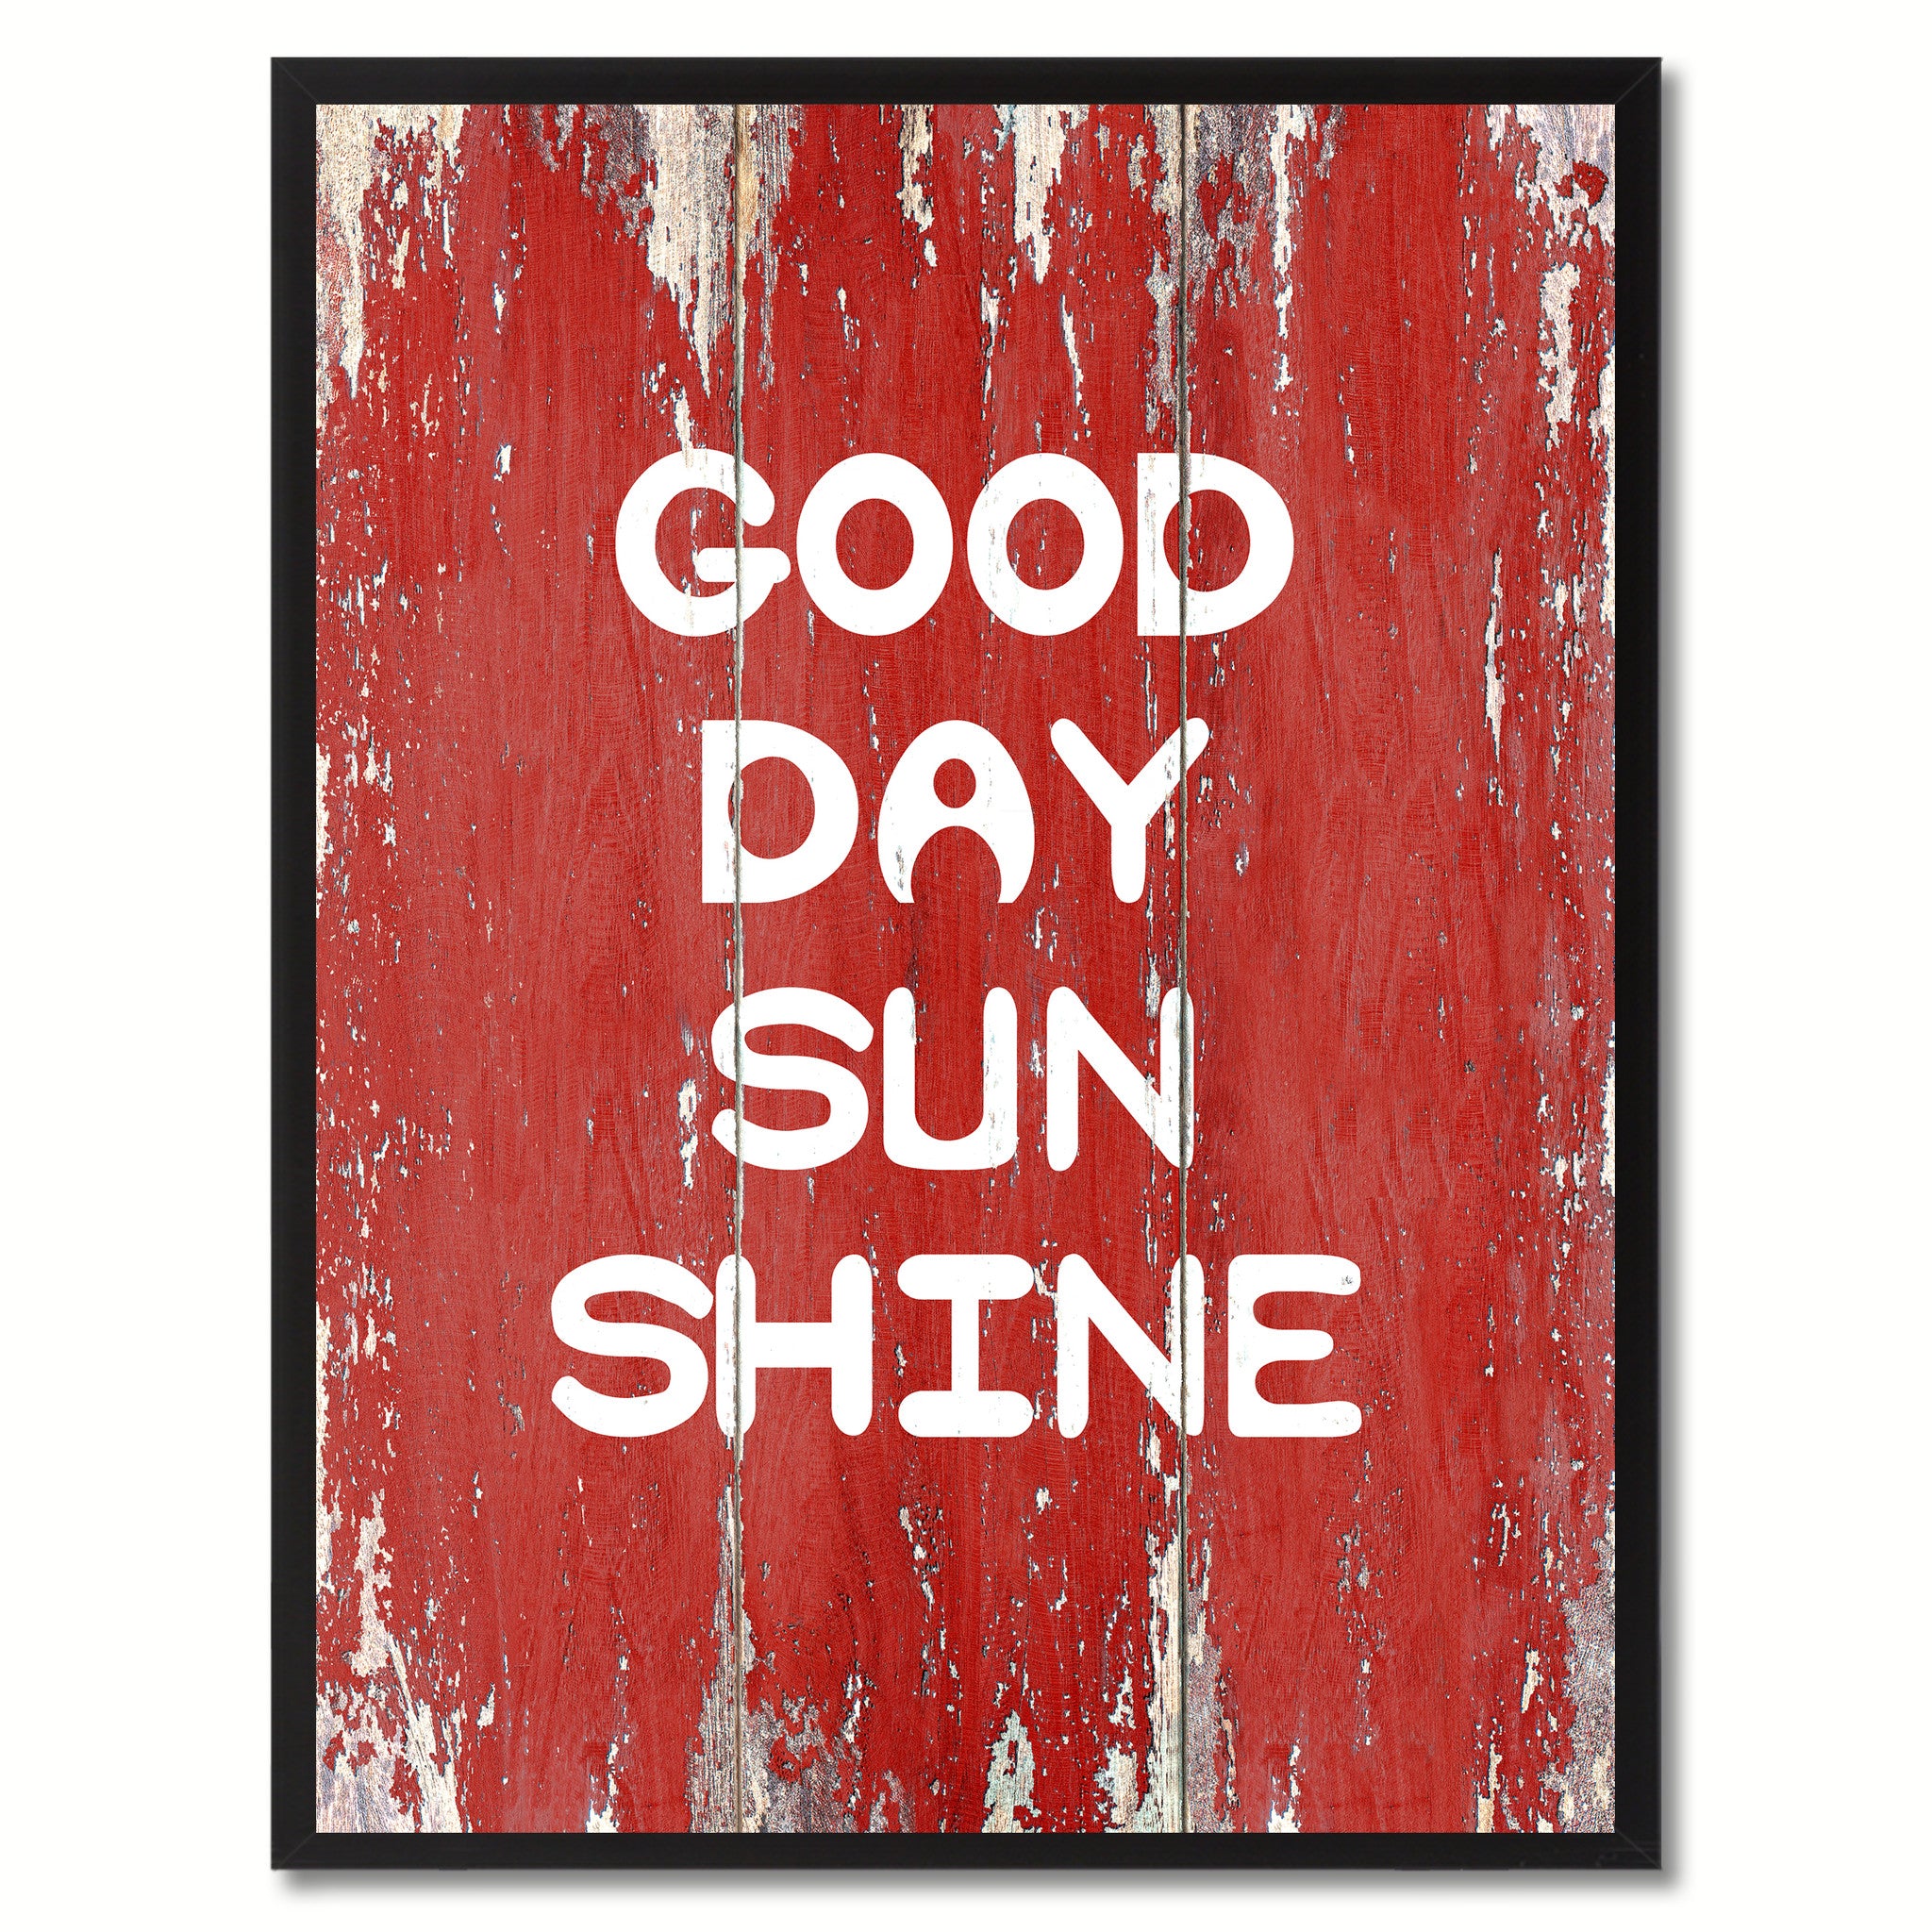 Good Day Sun Shine Saying Canvas Print, Black Picture Frame Home Decor Wall Art Gifts